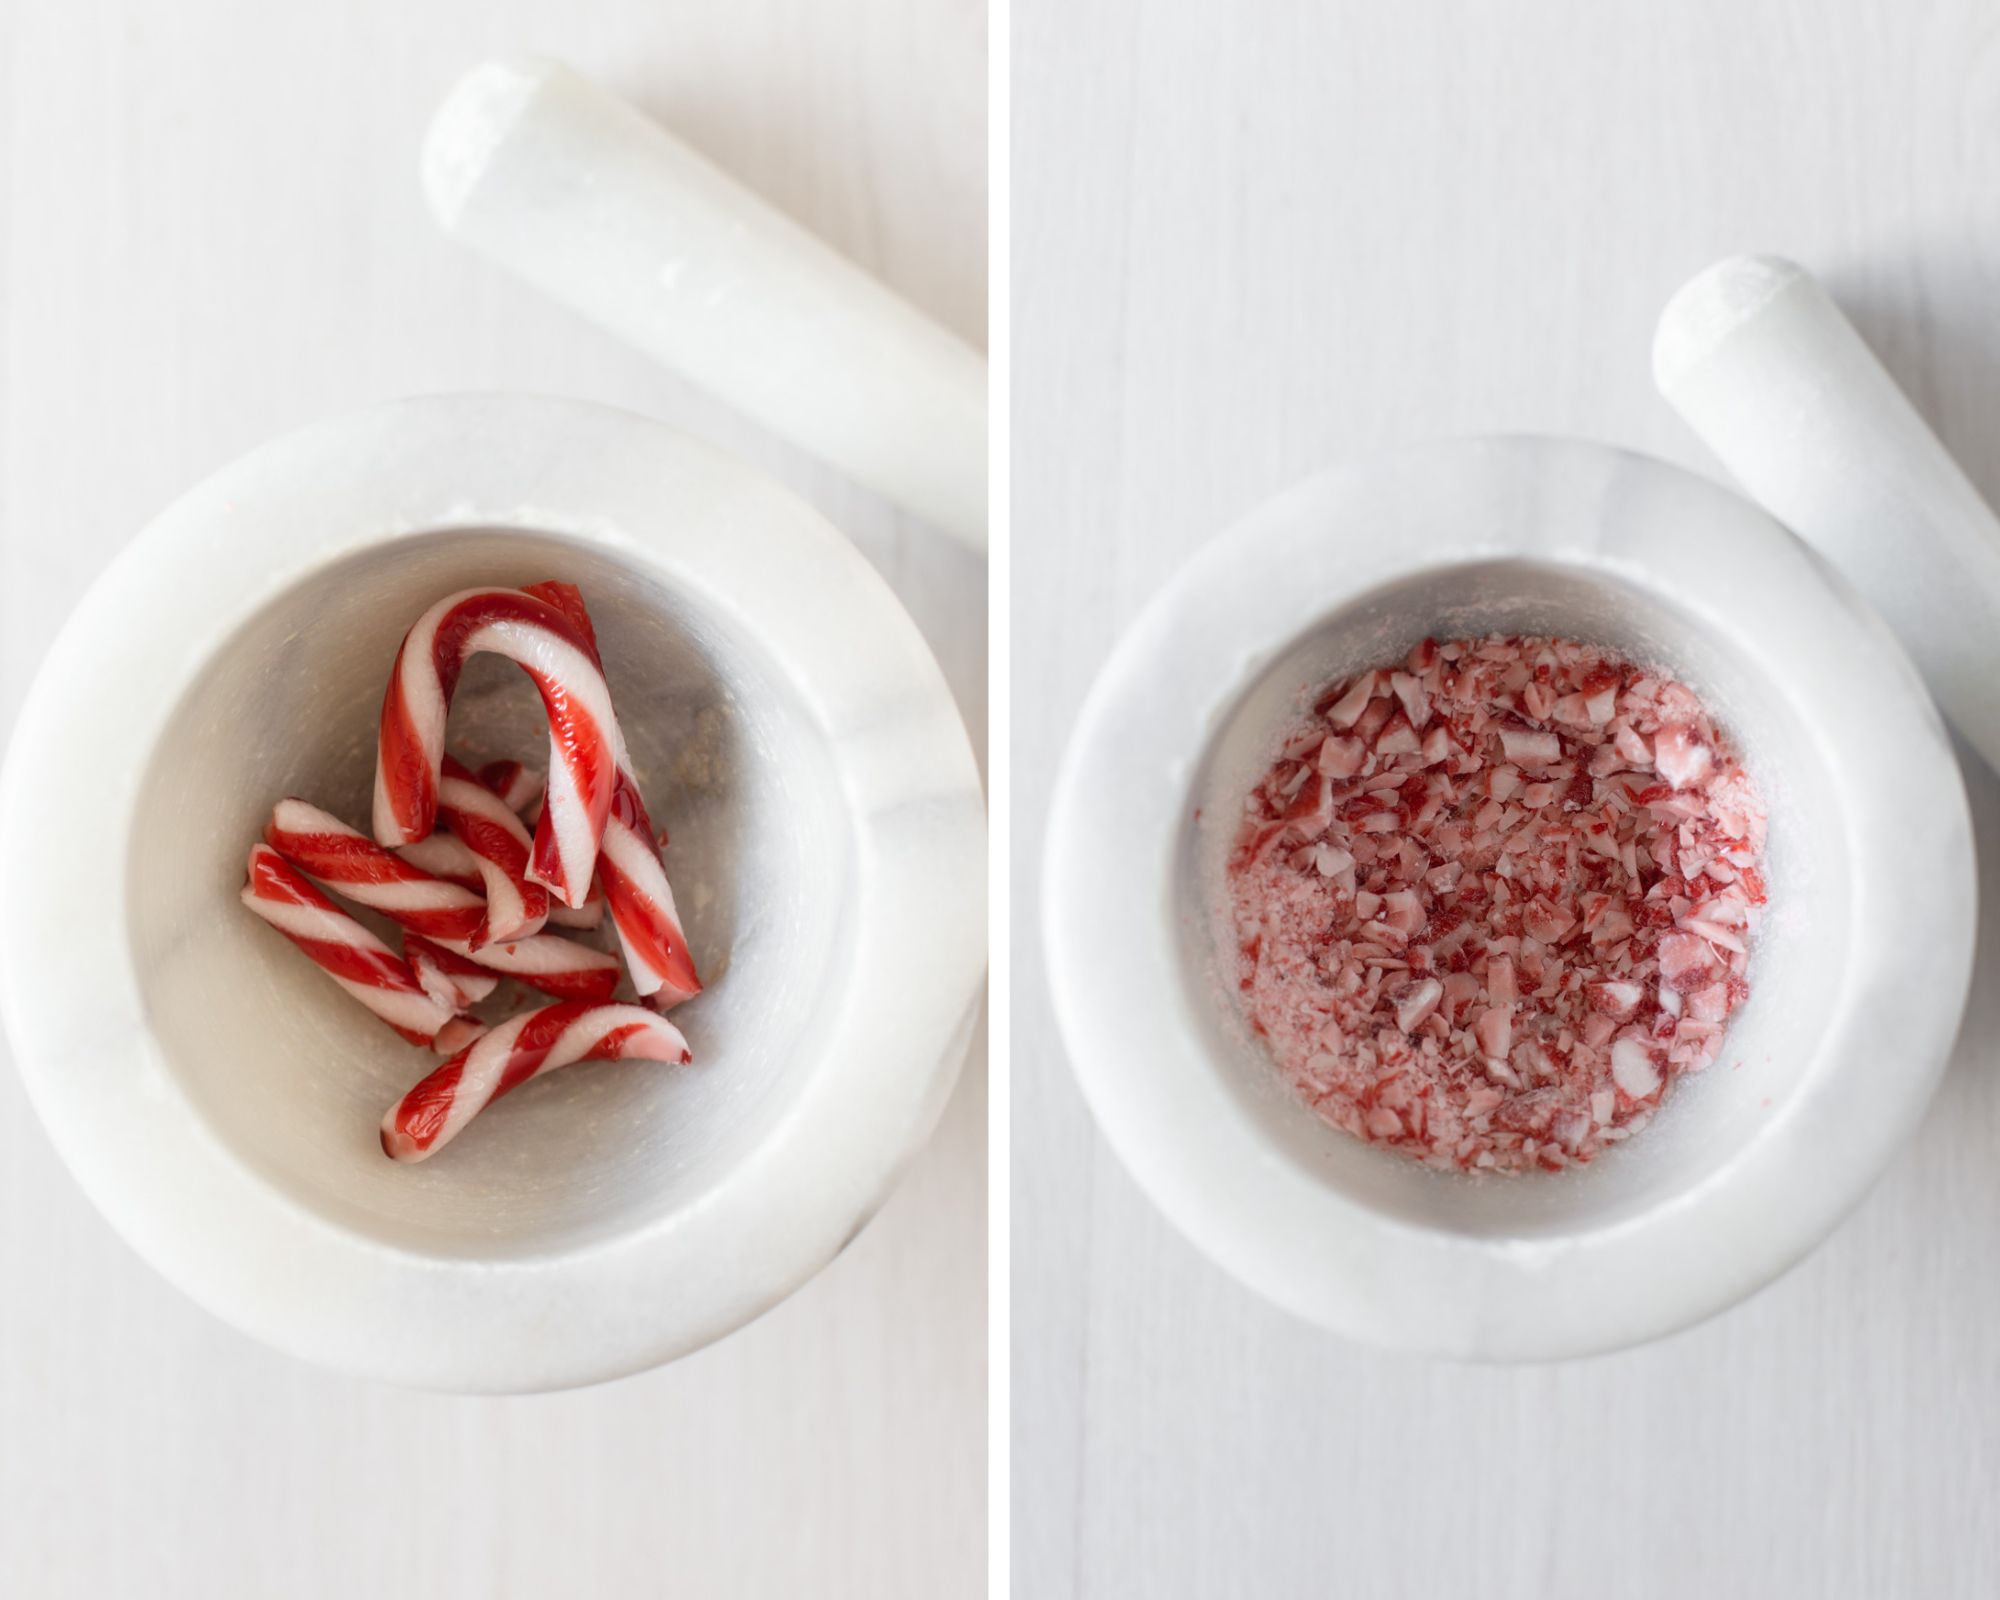 Crushing the candy canes in a mortar and pestle.